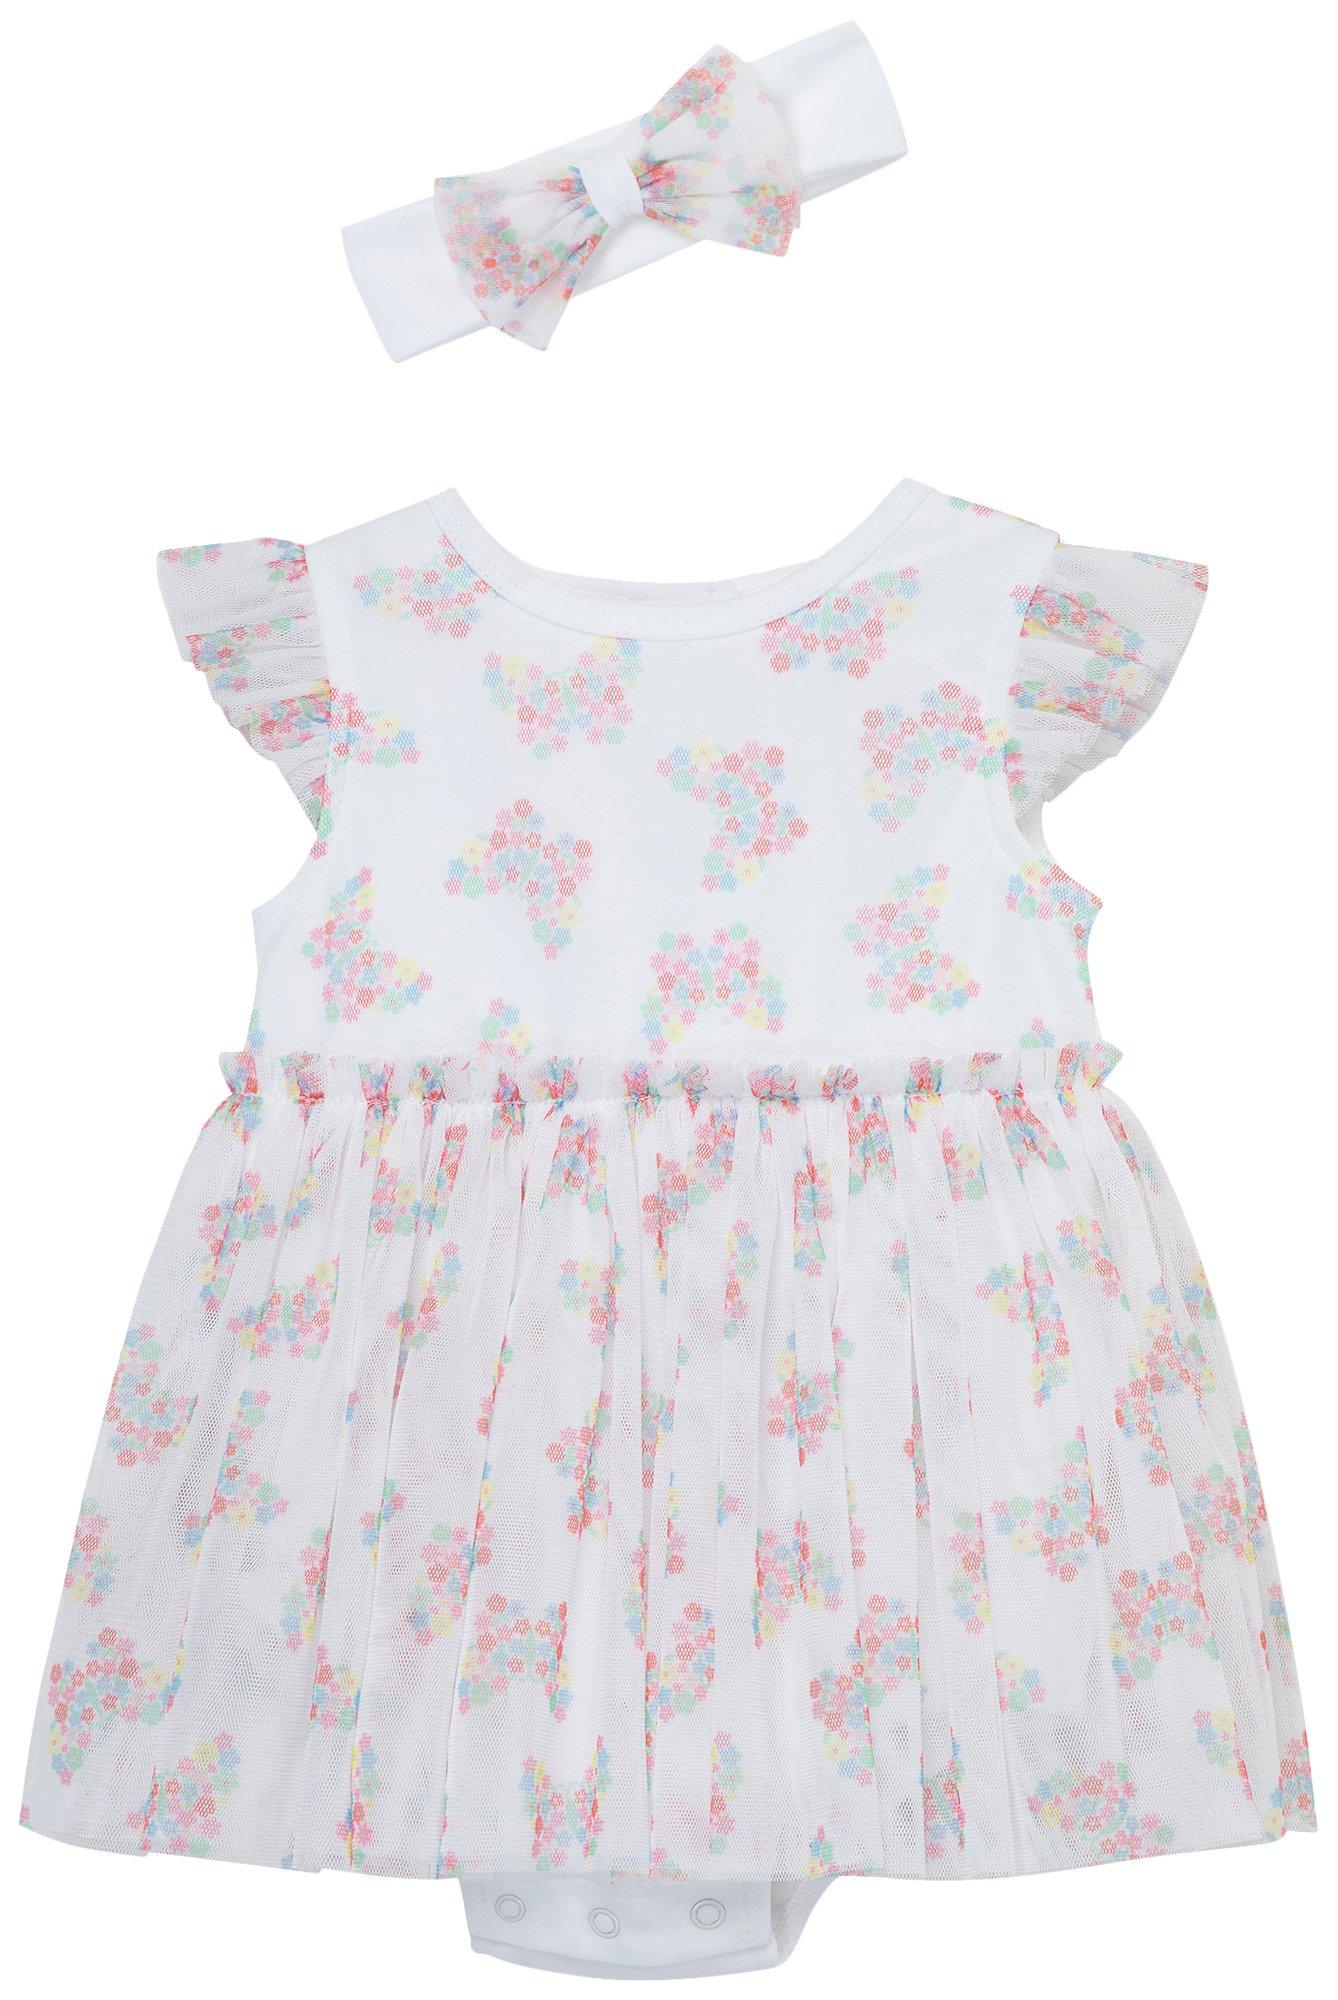 Baby Girls 2 Pc. Butterfly Popover Set